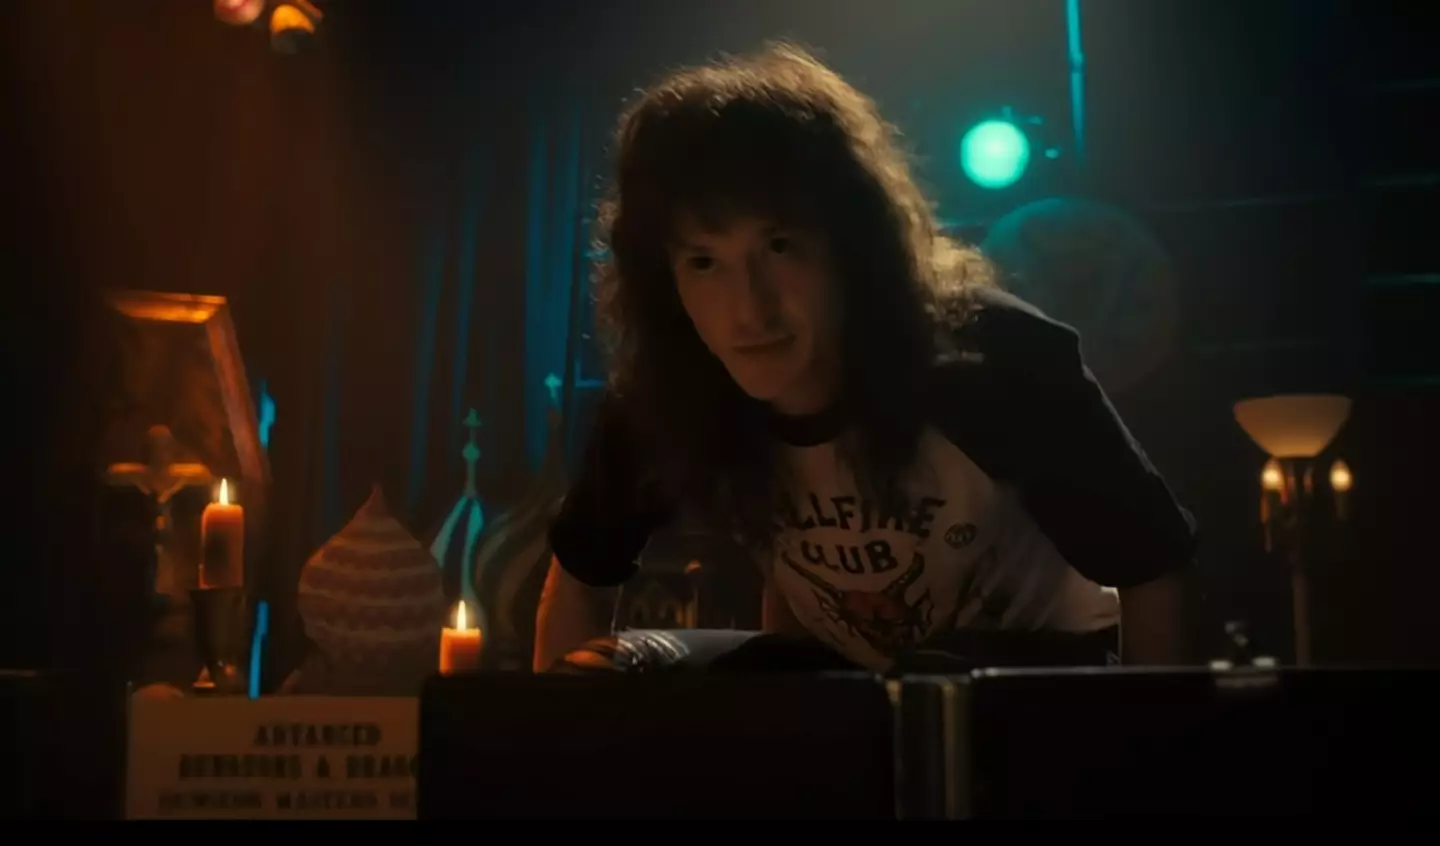 Eddie quickly became a favourite among Stranger Things fans.